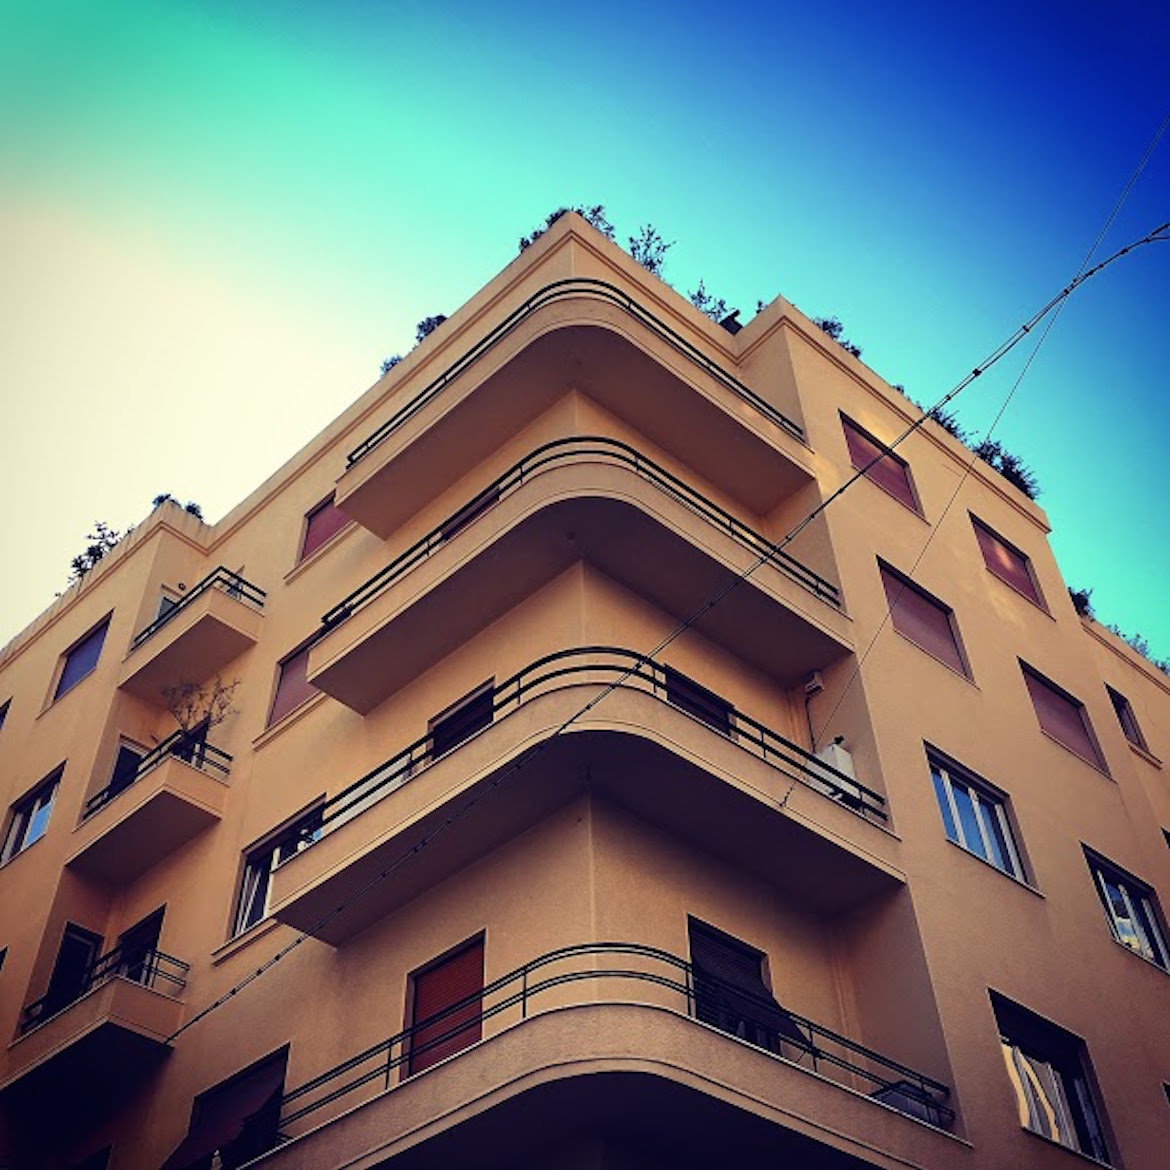 A building on the corner of Ploutarchou & Charitos streets.